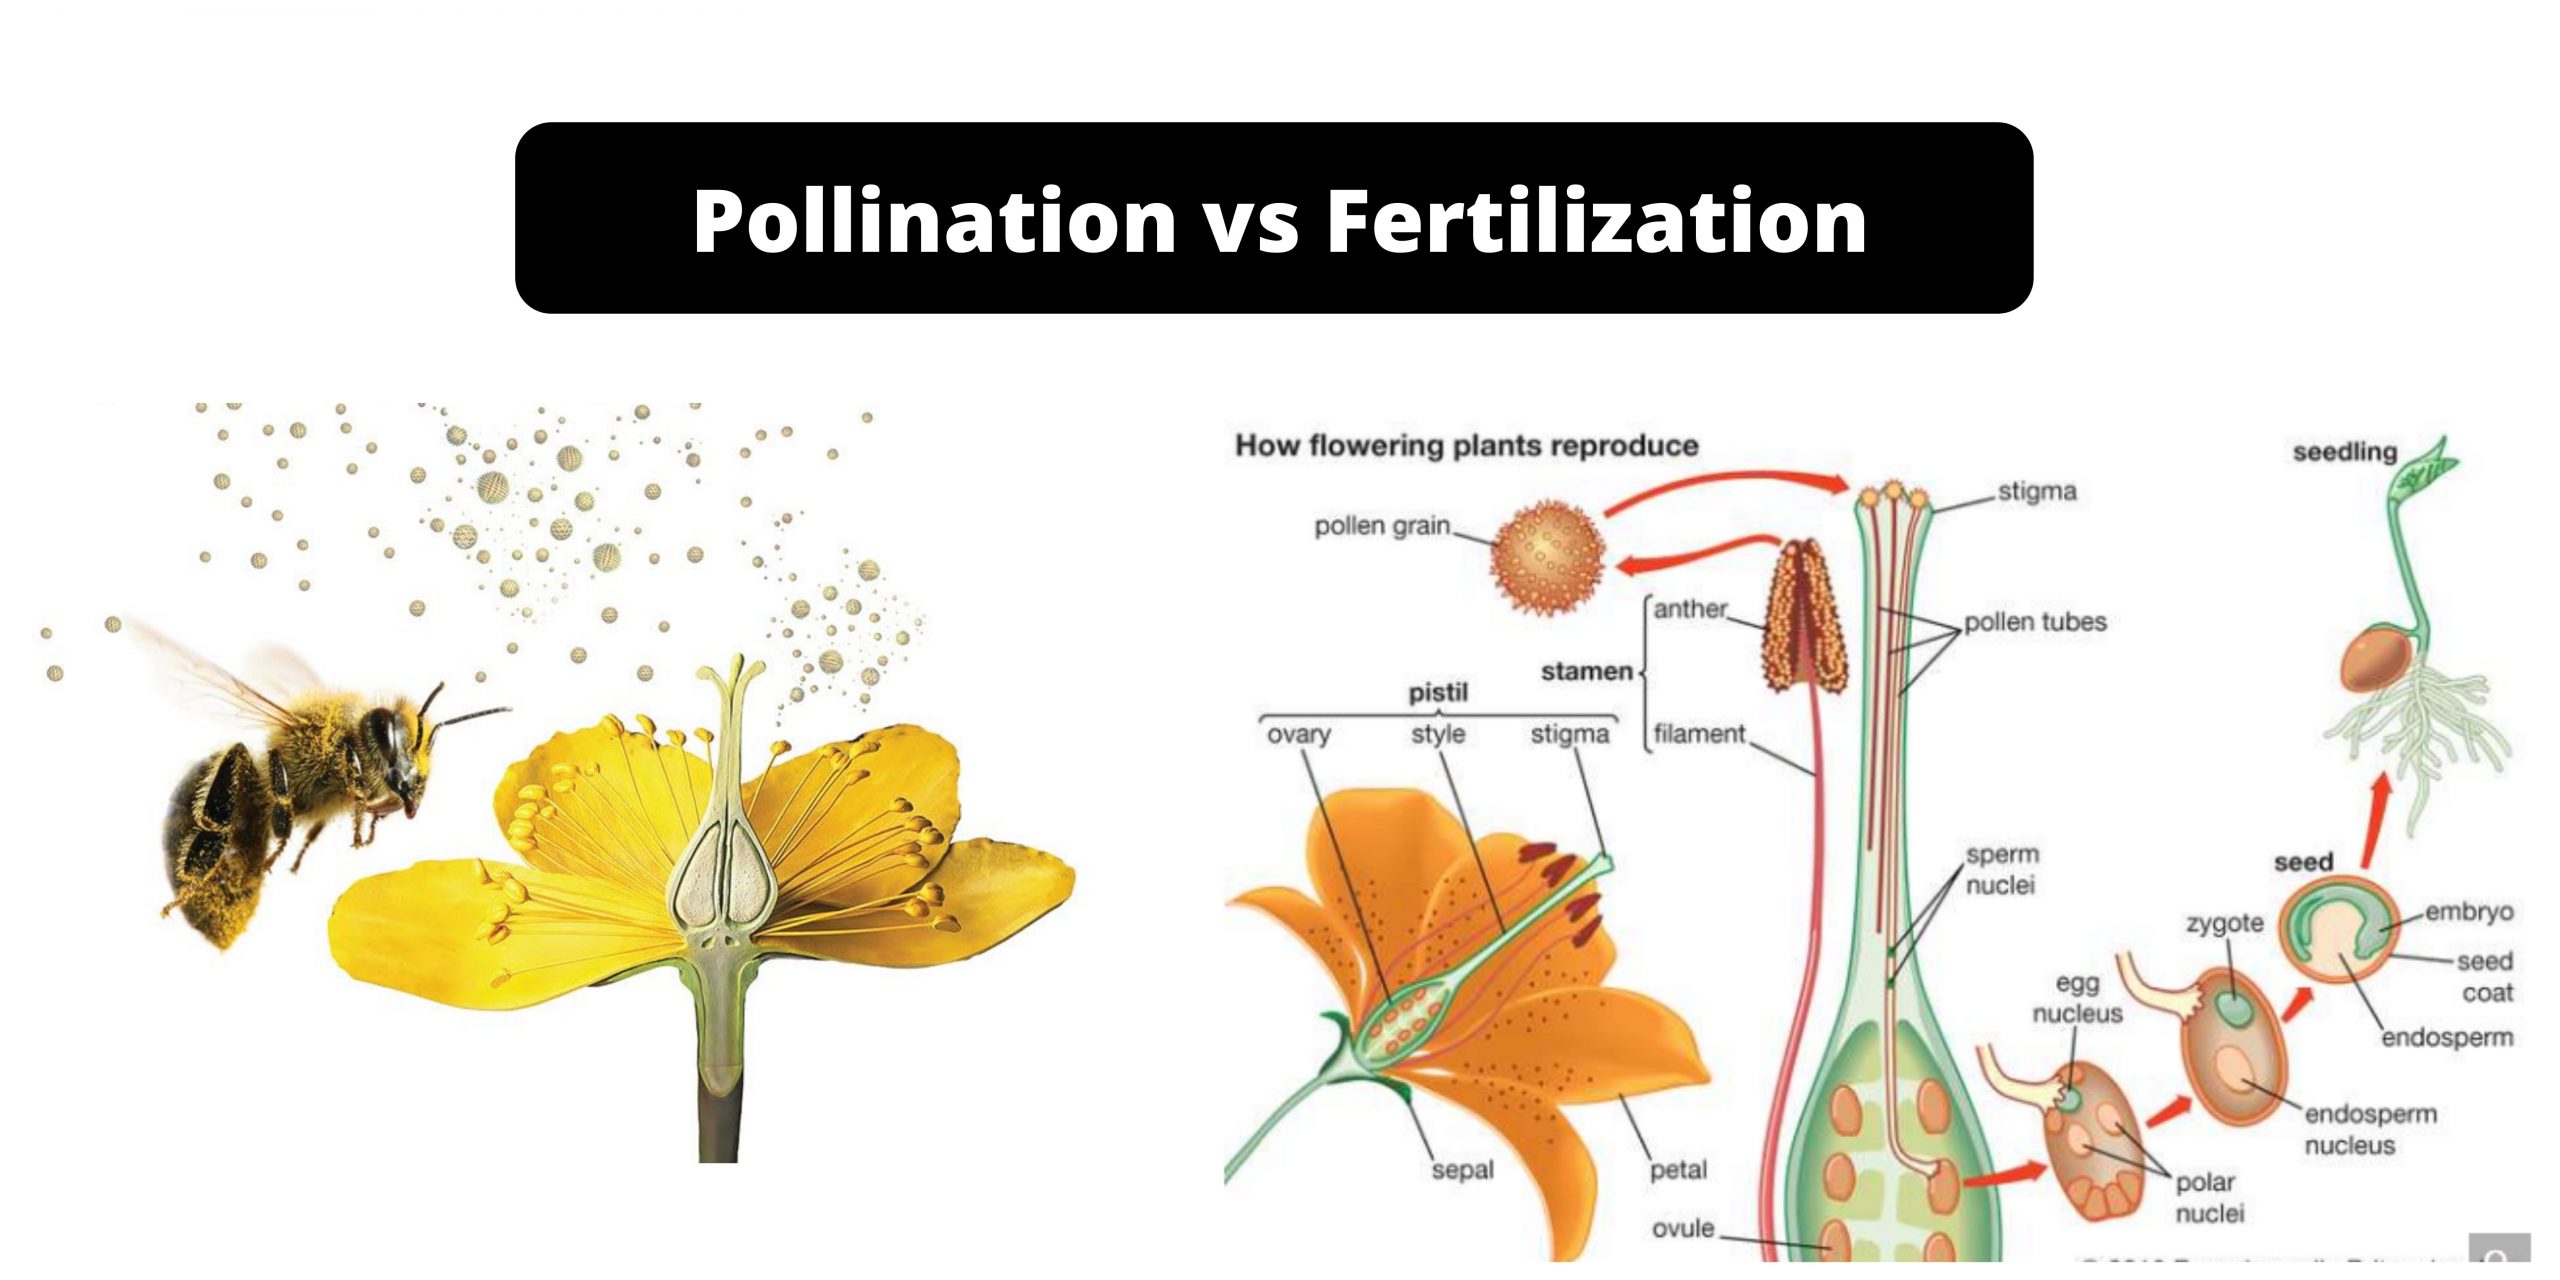 Difference Between Pollination and Fertilization - Pollination vs Fertilization